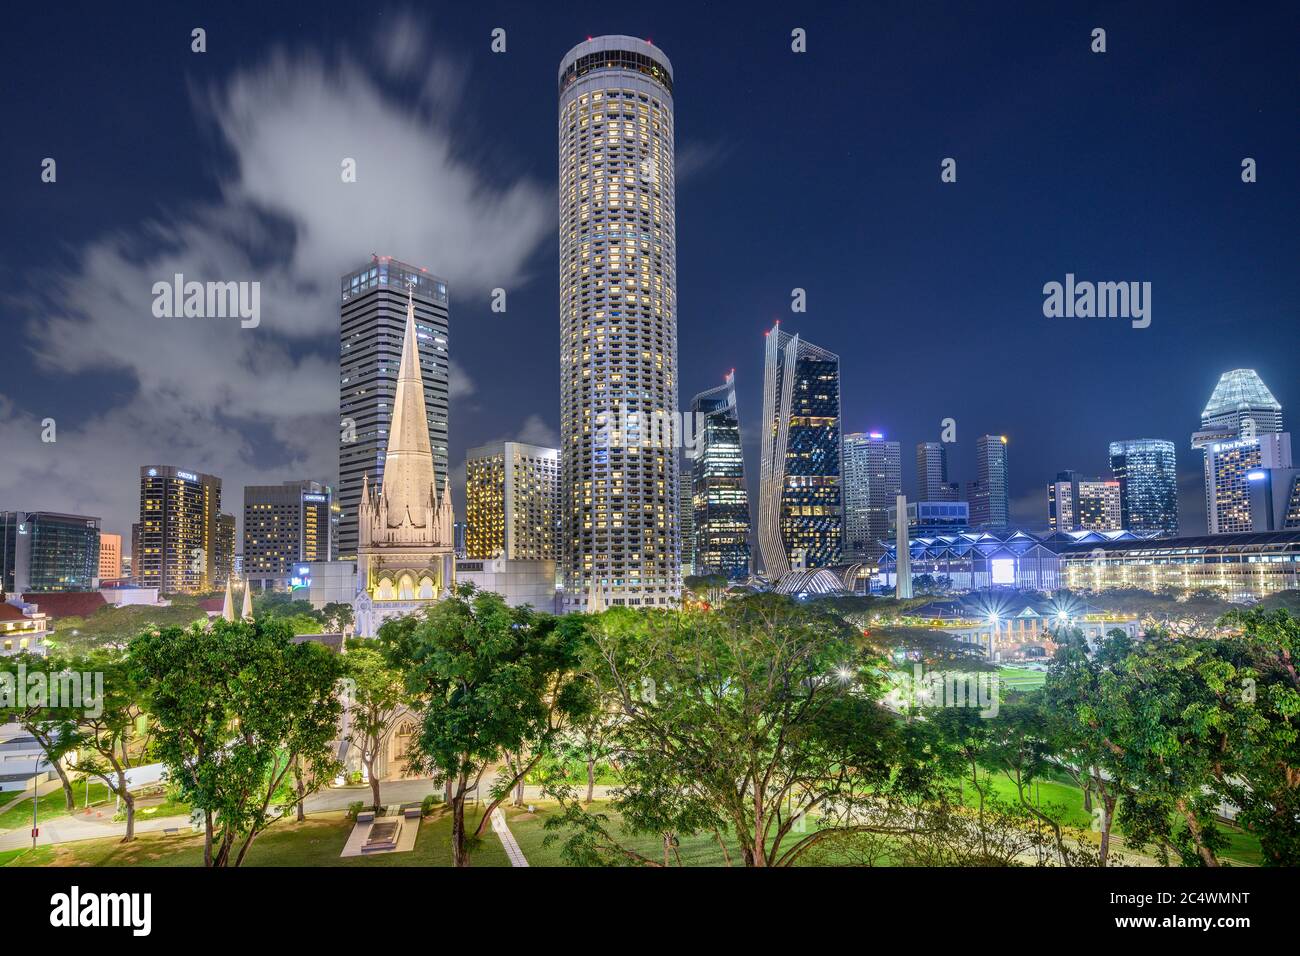 Singapore 01. January 2020 : St. Andrew's Cathedral and Swissôtel The Stamford at night Stock Photo